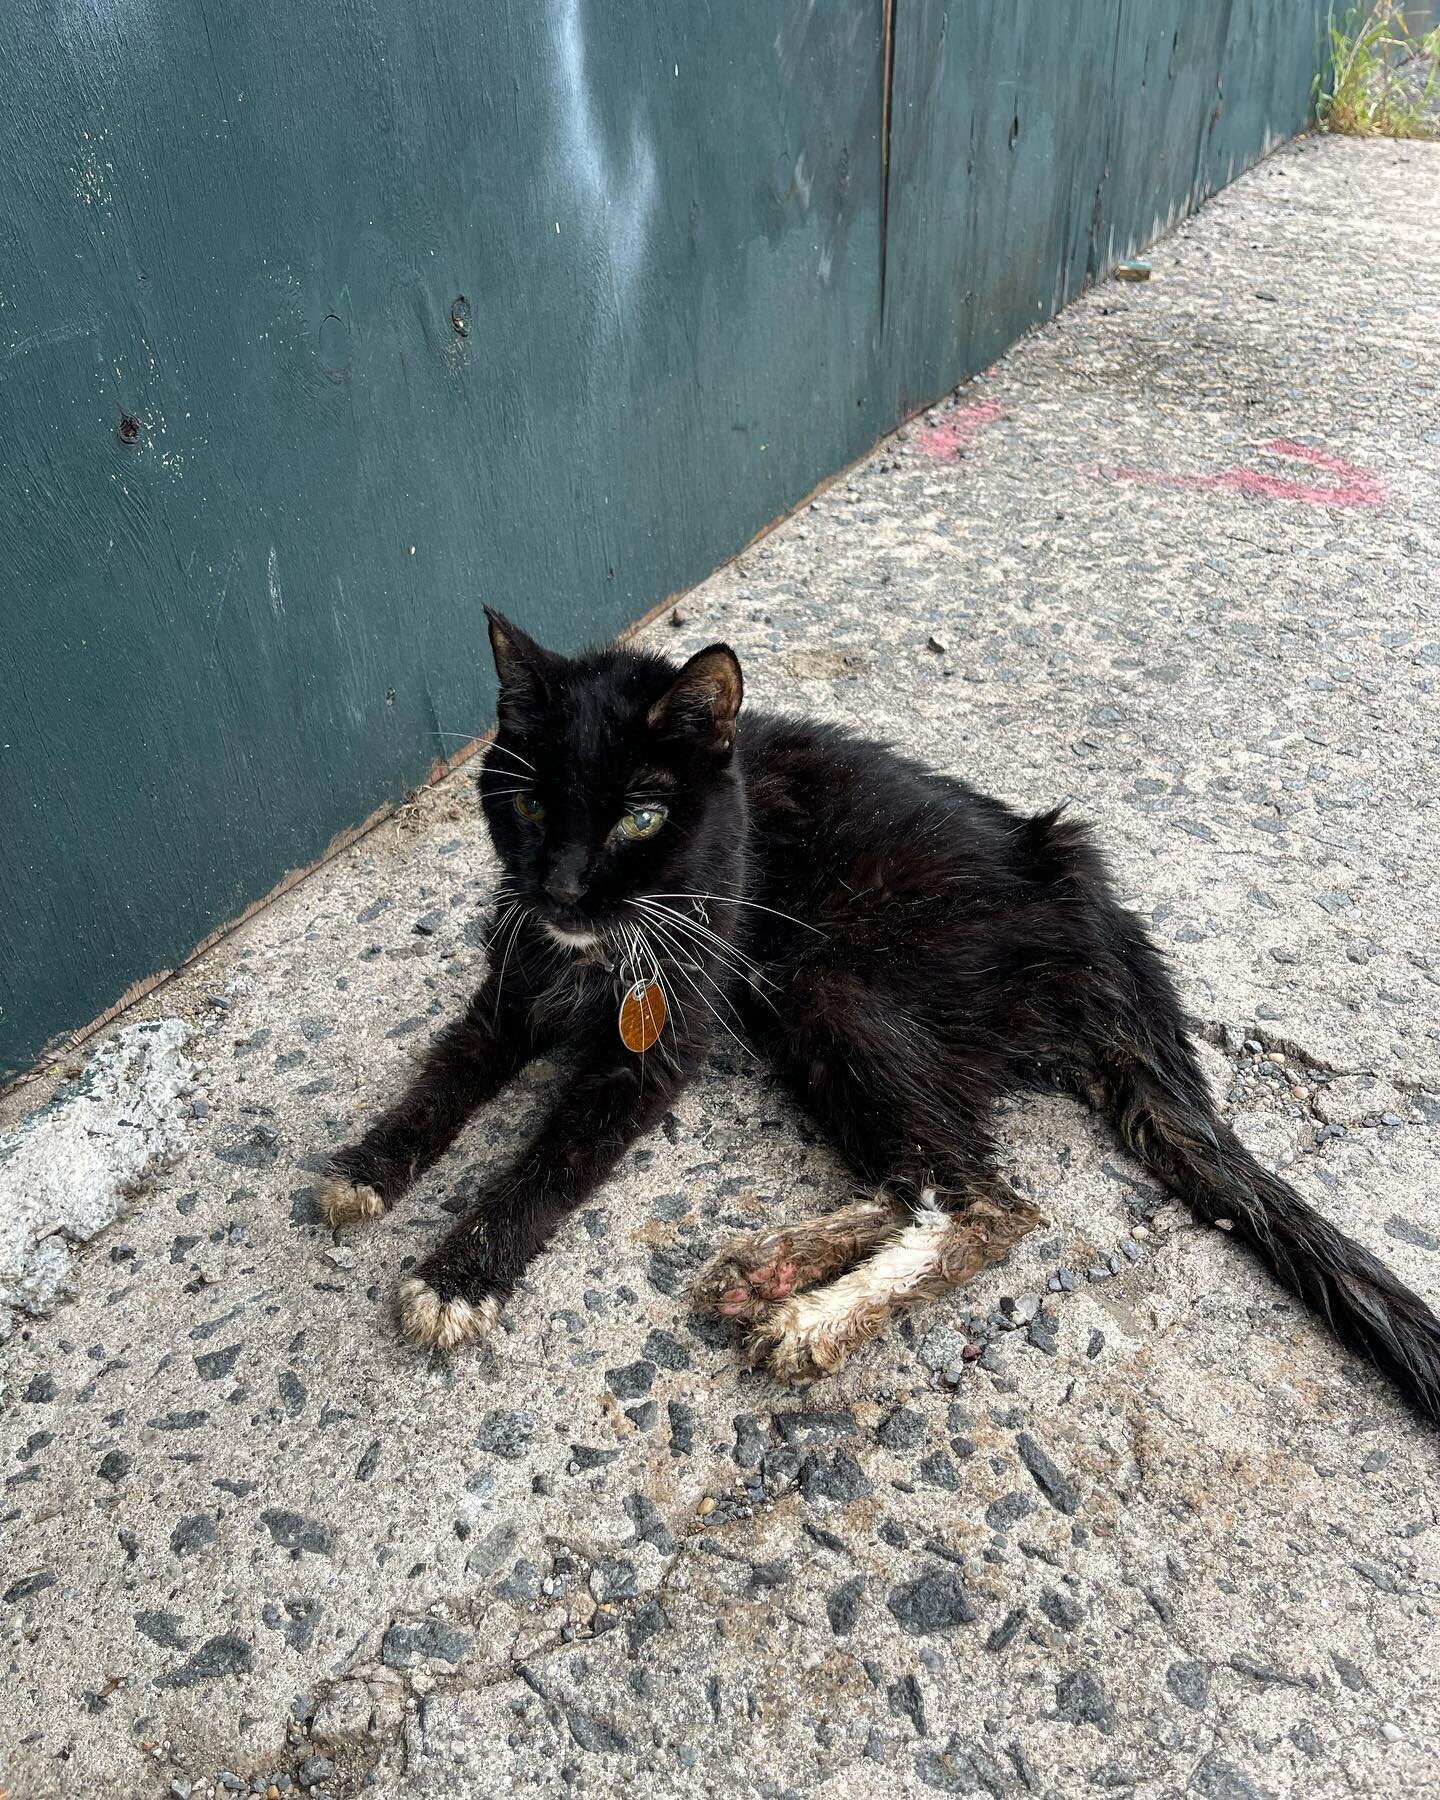 &ldquo;Hope&rdquo; was found this morning on Commercial Street in Greenpoint. Filthy and emaciated and clinging to life. He has tags but the owner is so far unreachable. Records show she is around 18 and was last seen by the vet in 2014. He is on the